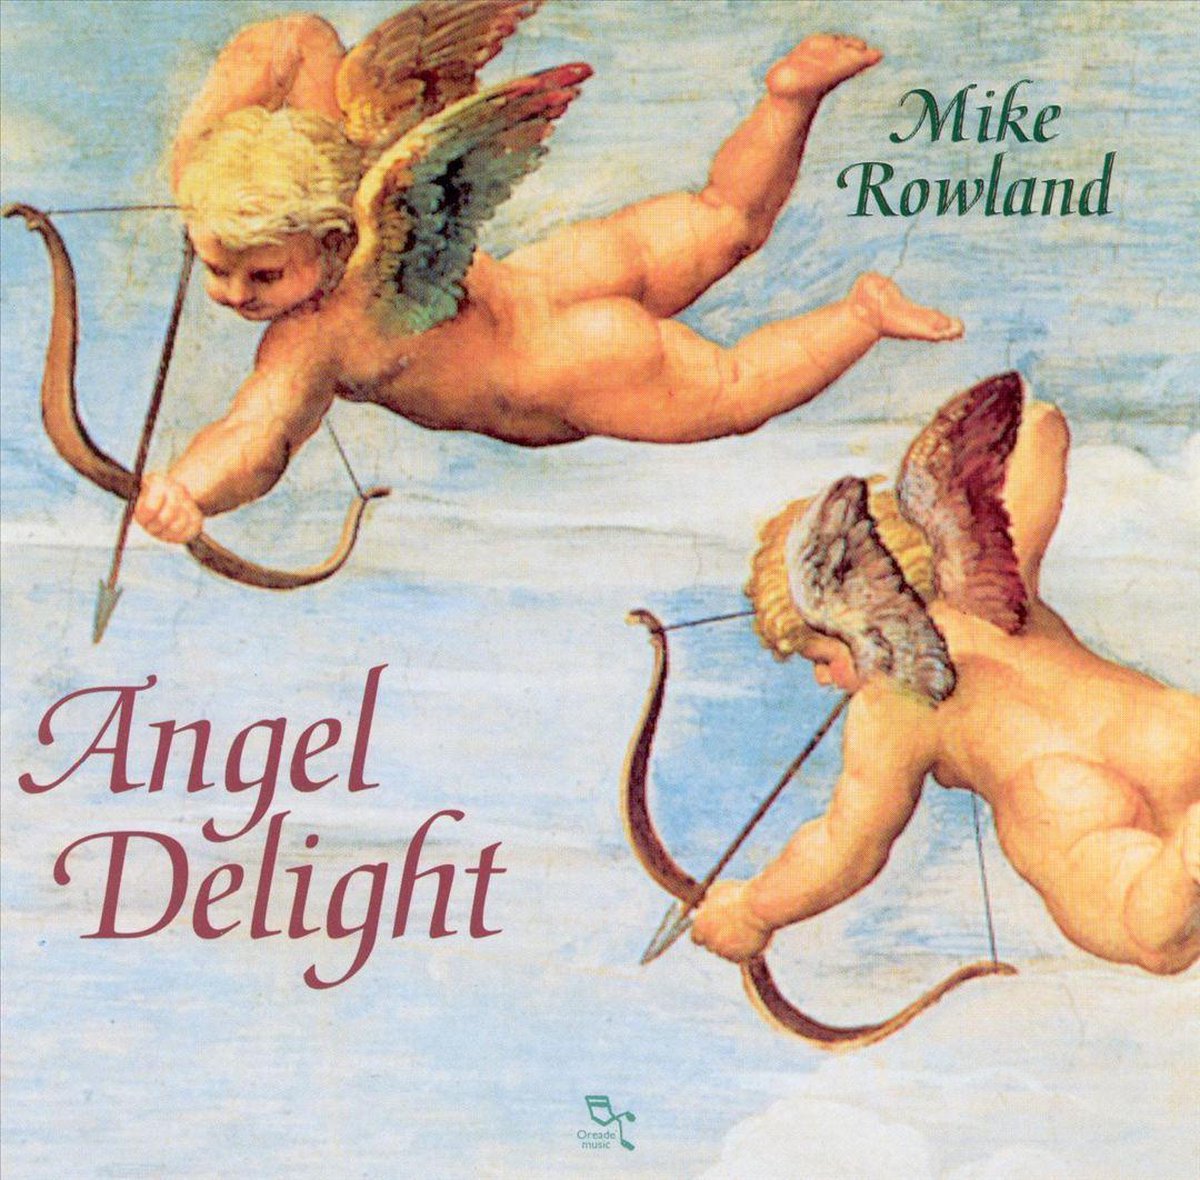 Mike Rowland - Angel Delight (CD)